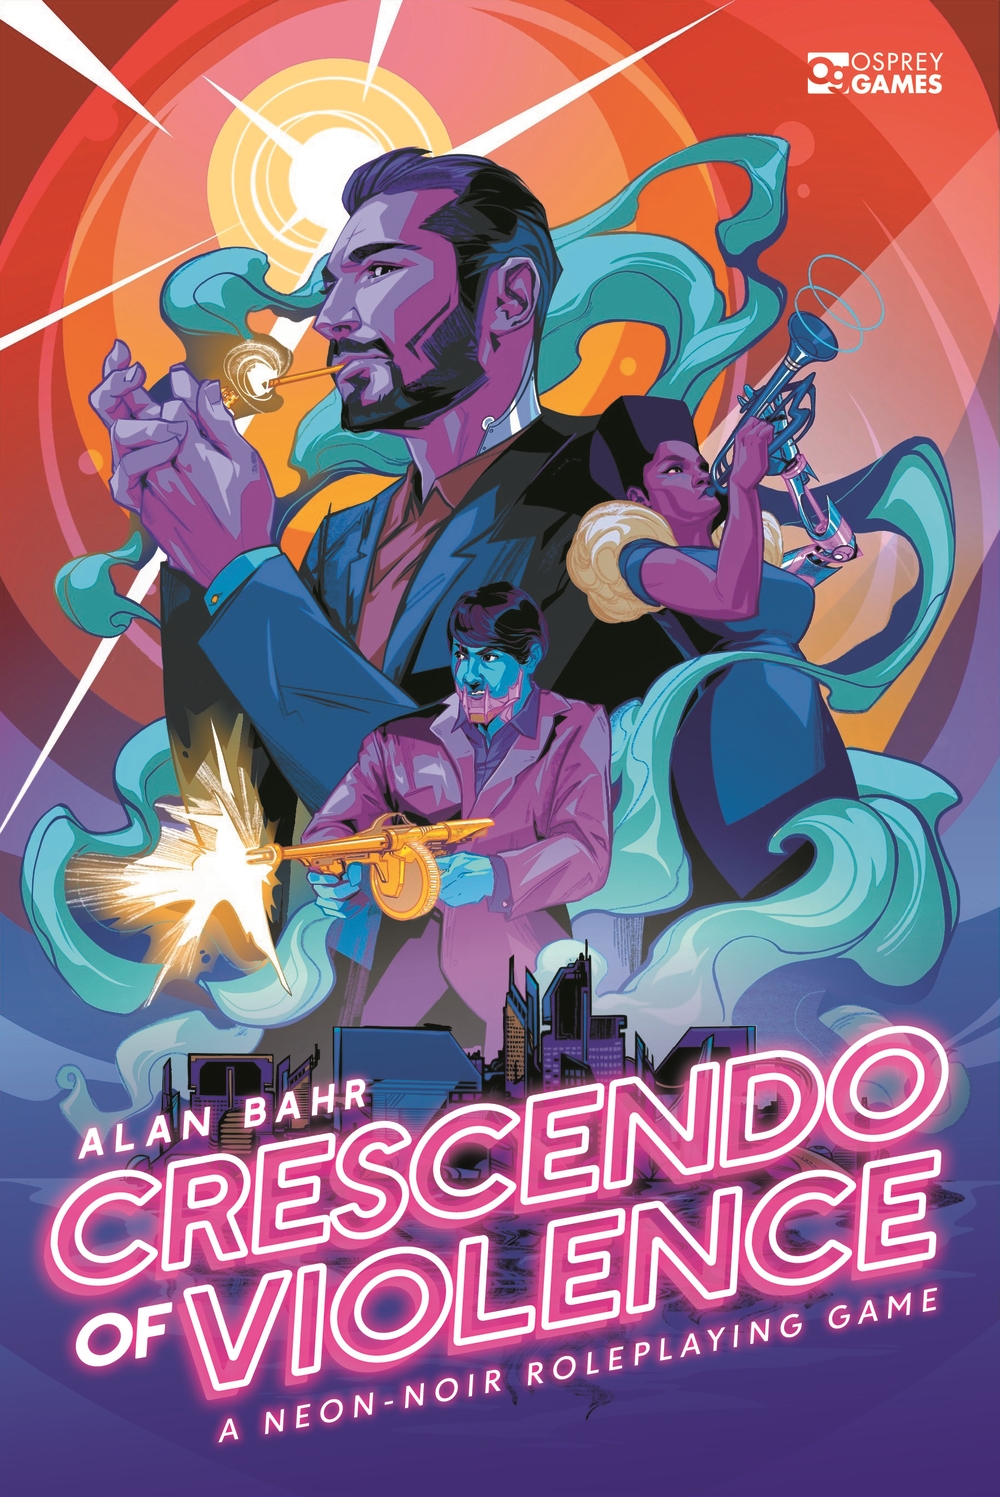 The Crescendo of Violence cover art showing three noir-ish but futuristic figures in vibrant colours; a man in a jacket smoking, a woman in a dress playing the trumpet, and a man in a suit with a mechanical jaw firing a tommy gun